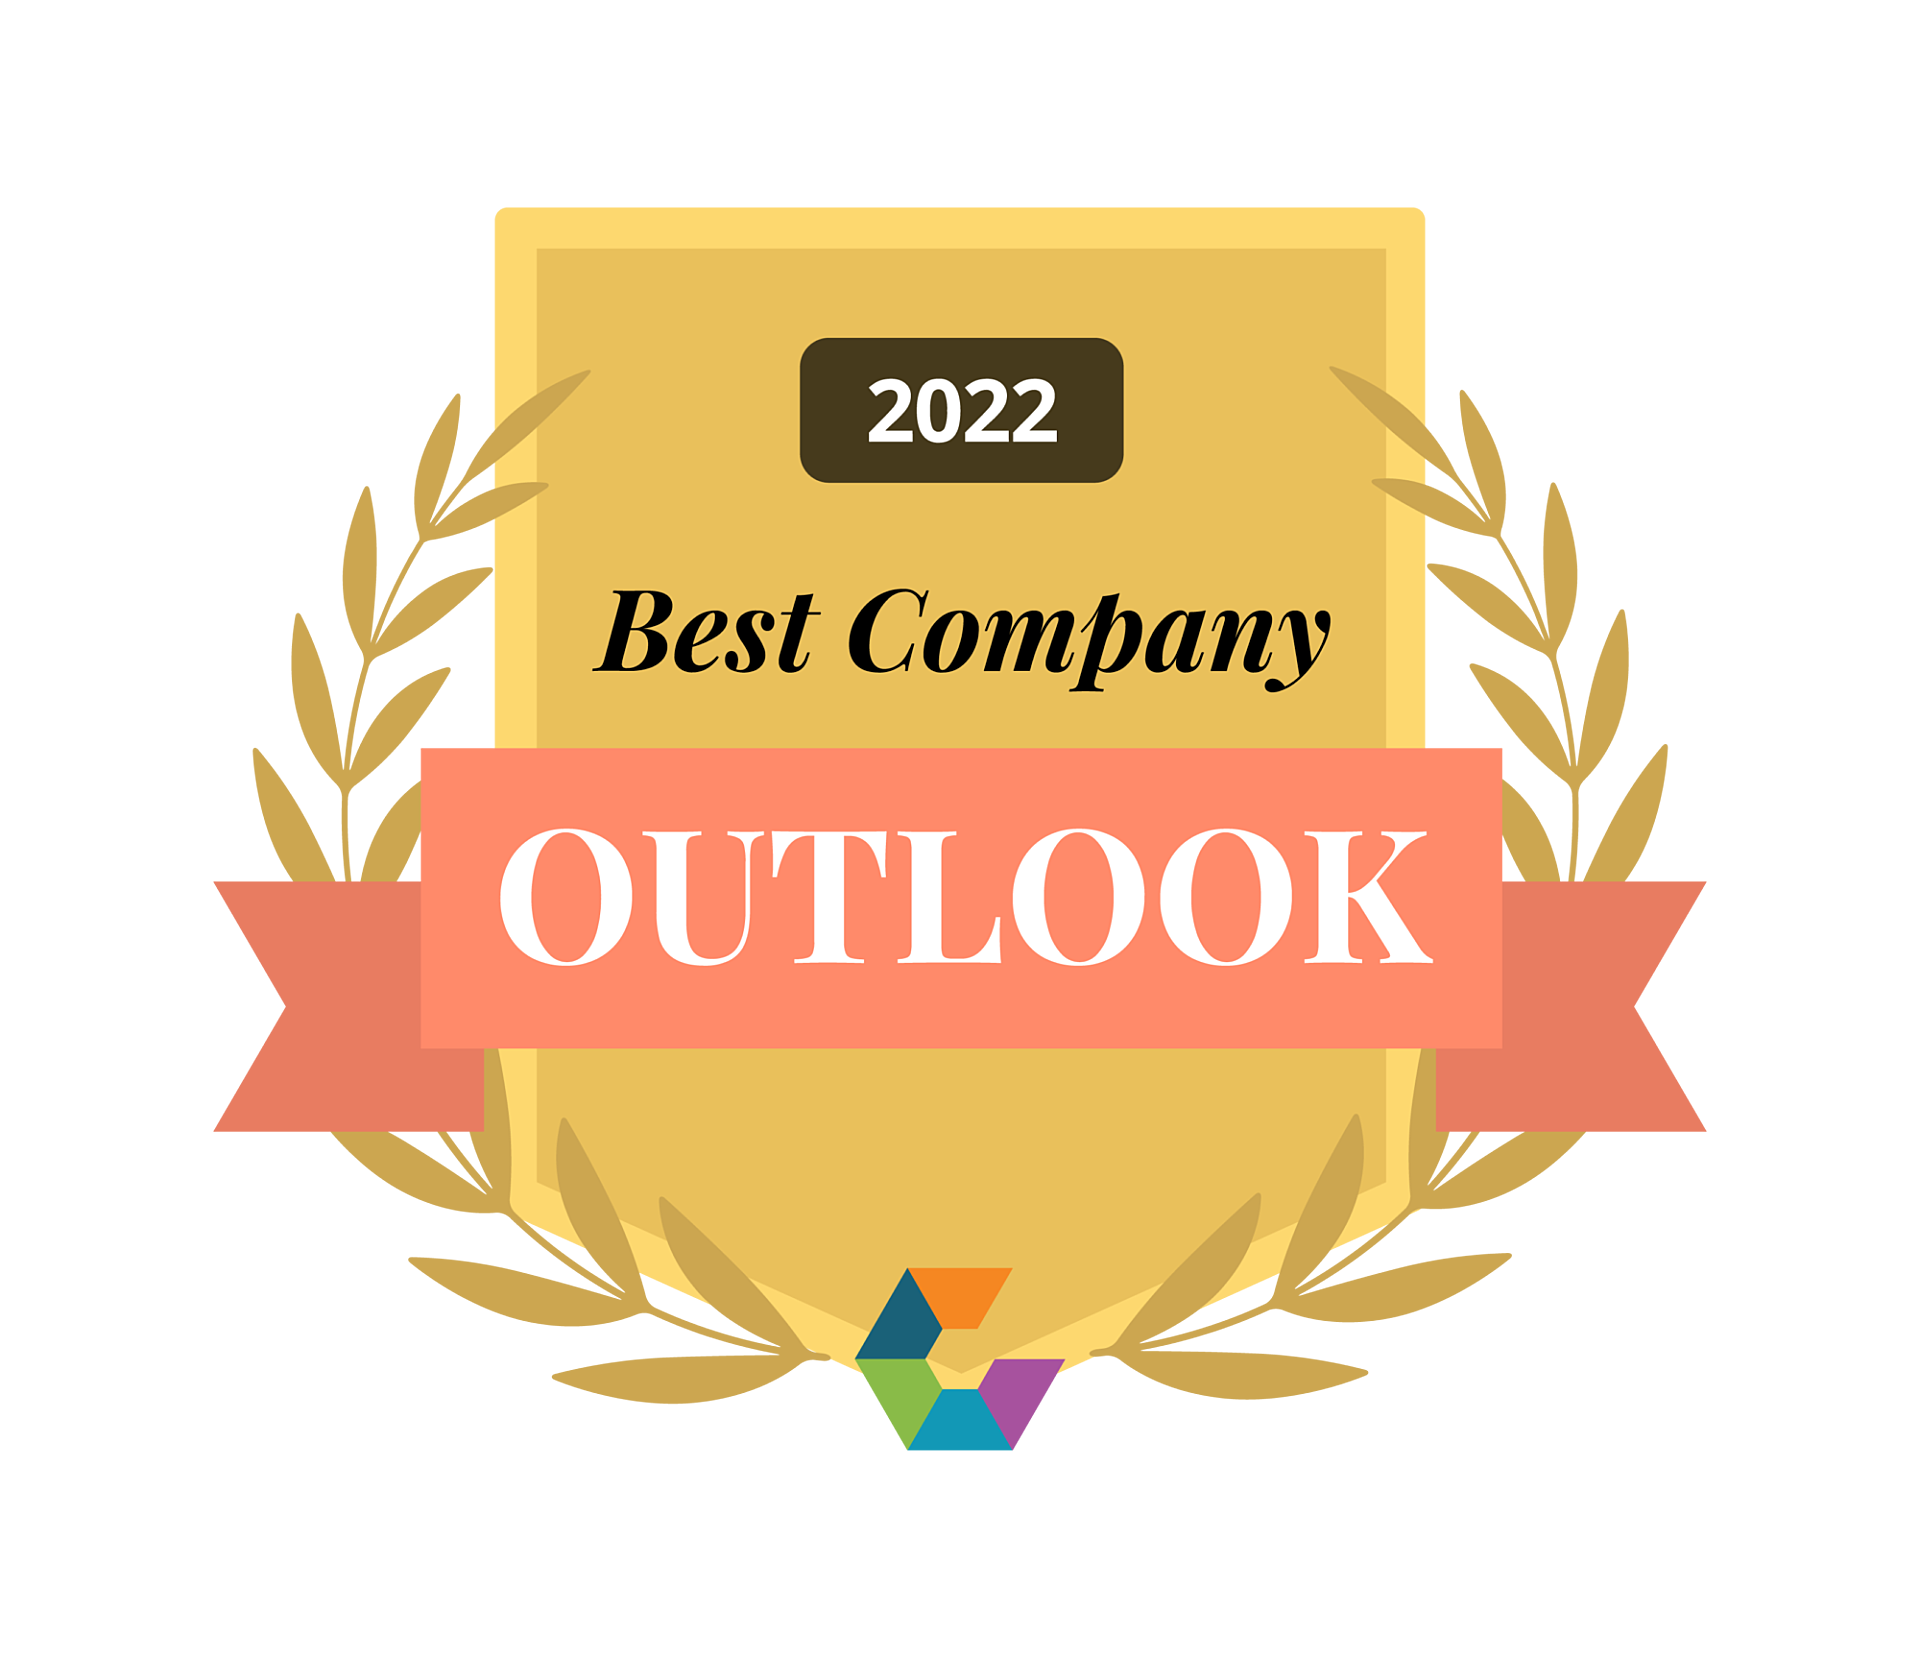 Comparably Award Best Outlook